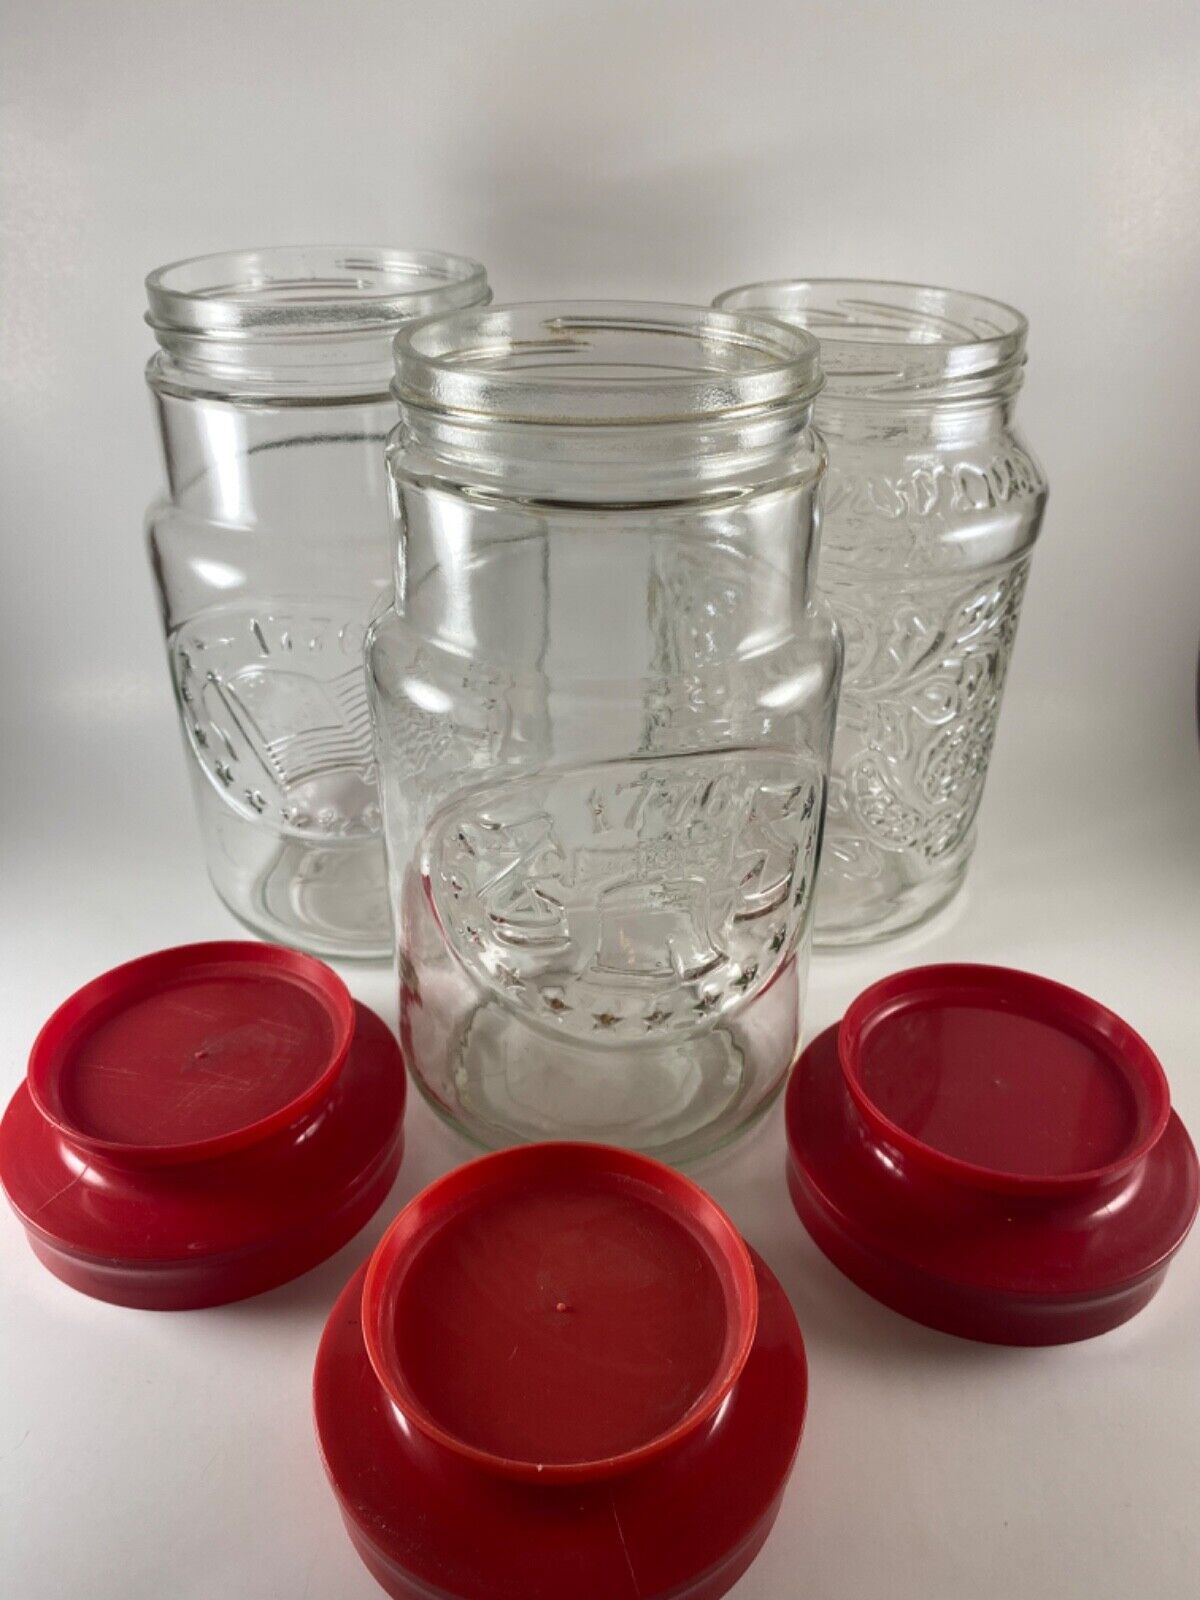 Three vintage Maxwell House Coffee Glass Jar Anchor Hocking Canister Red Lid